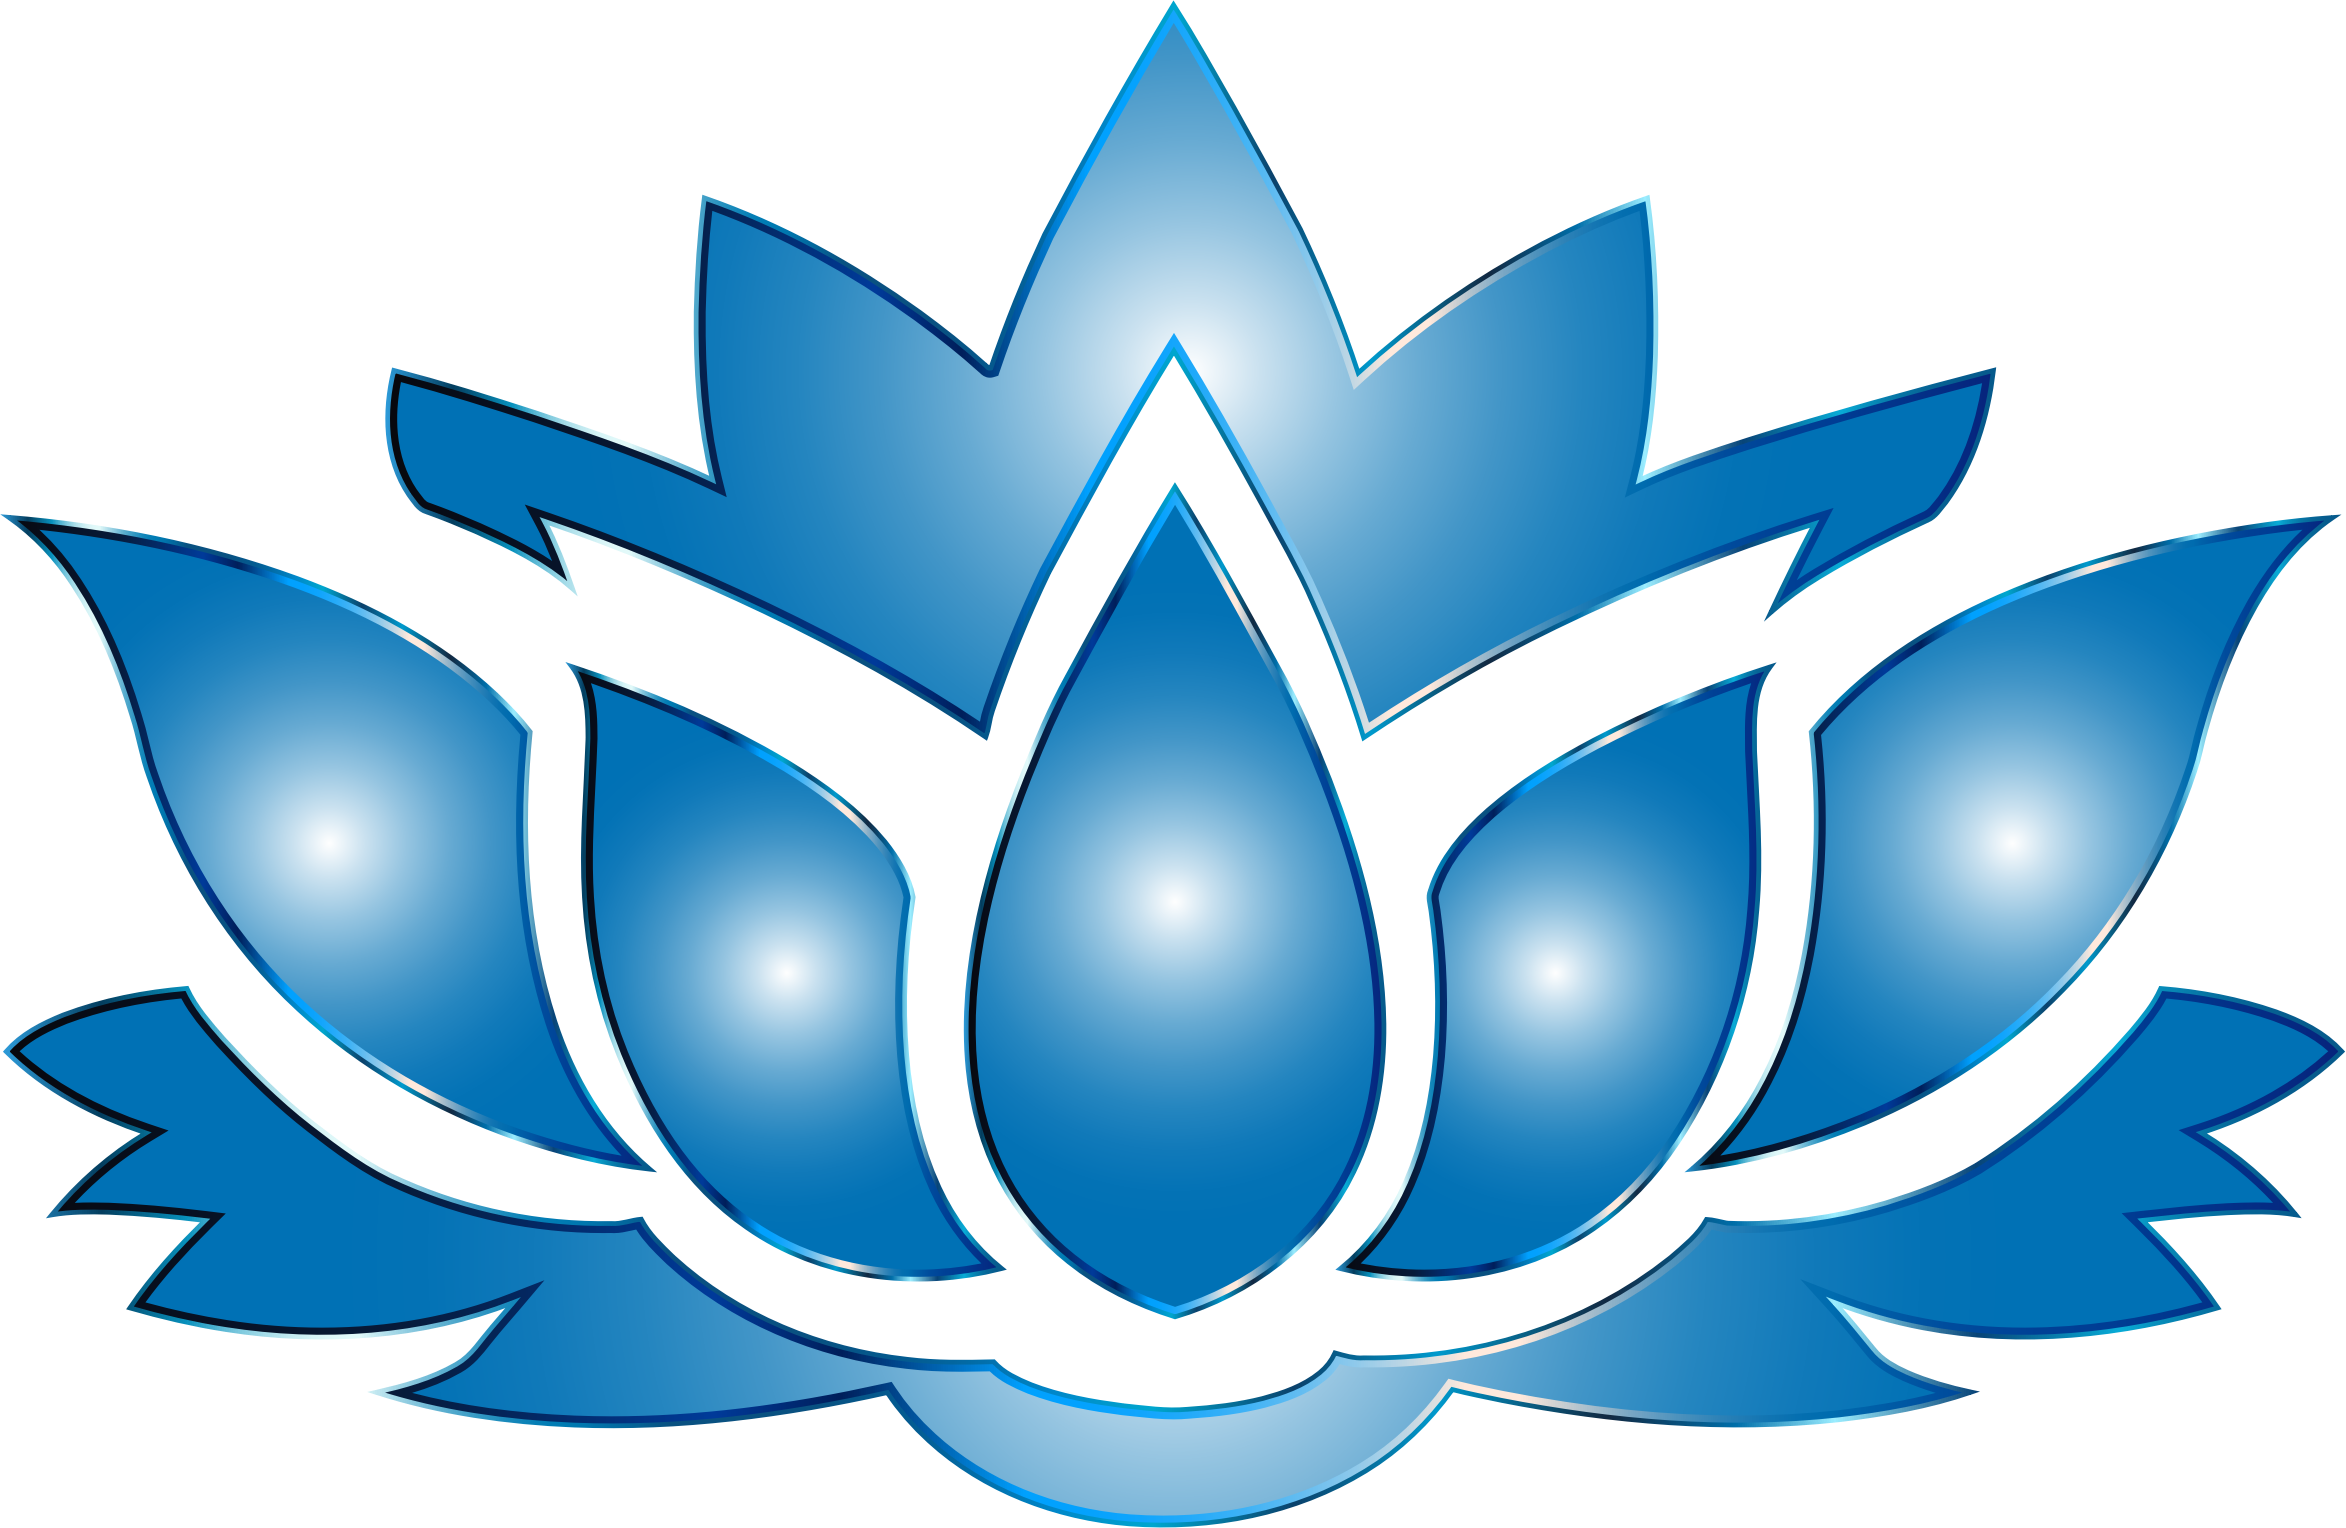  collection of high. Flower clipart blue lotus